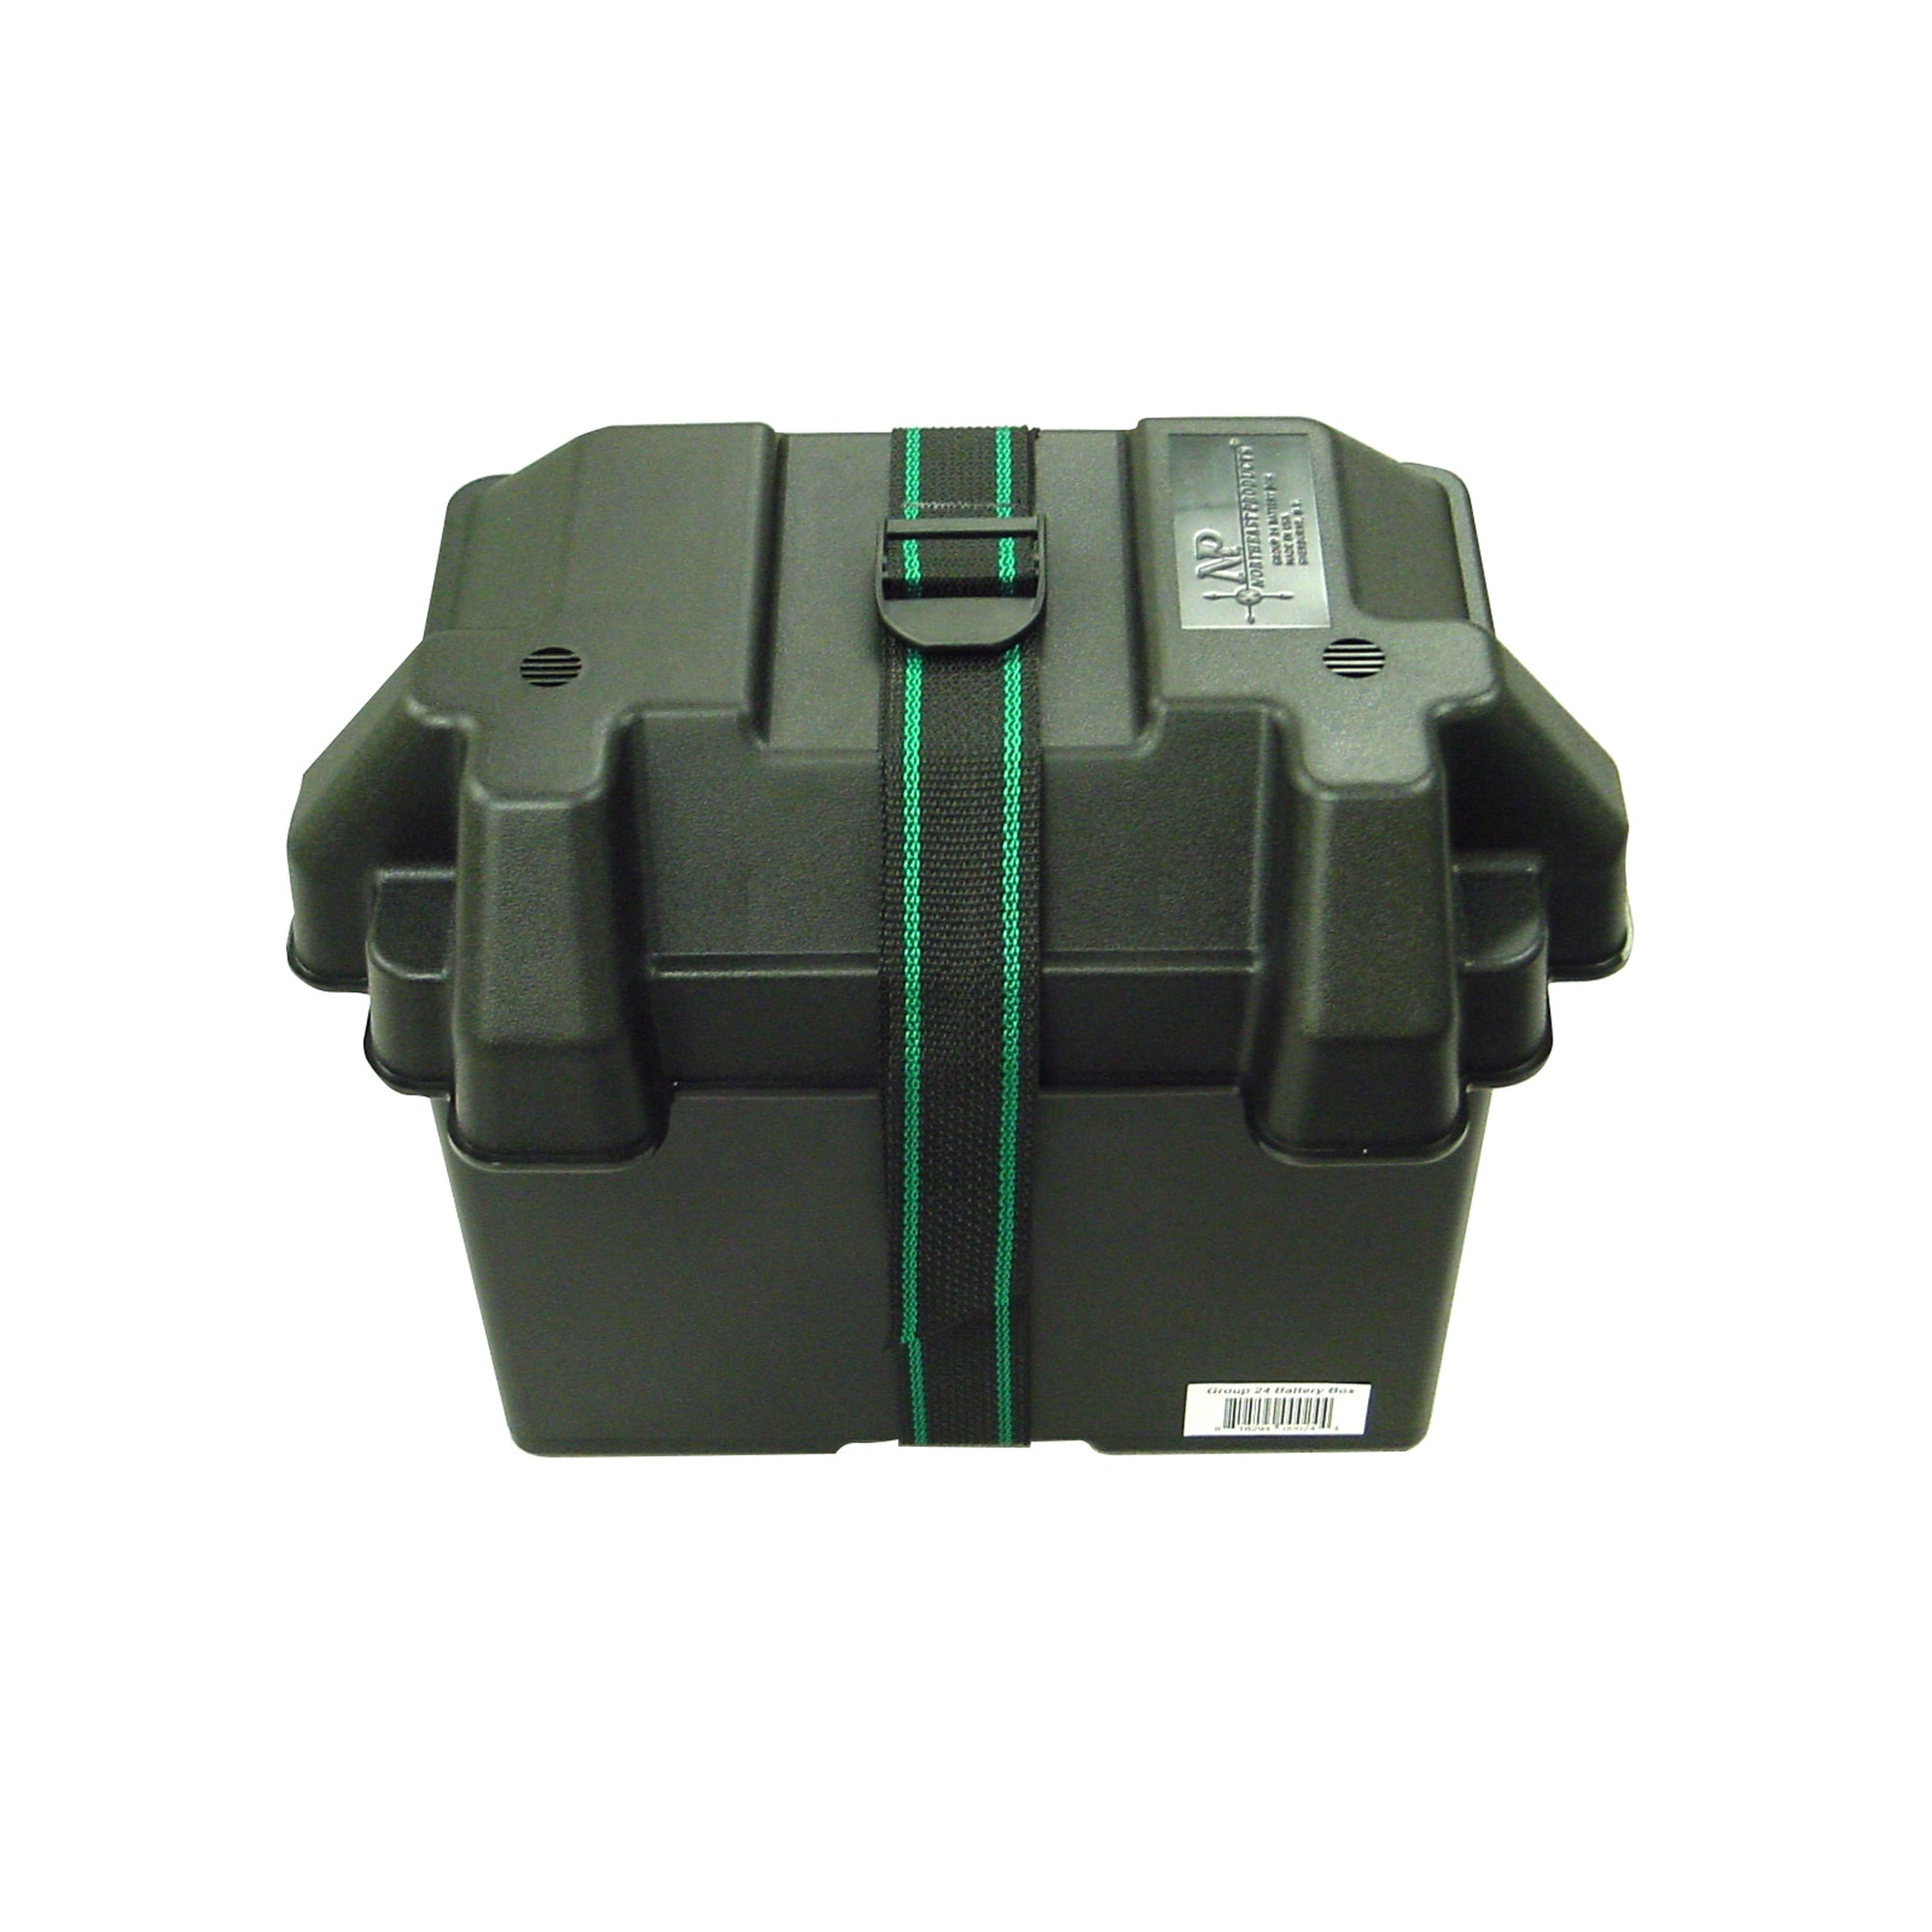 AP Products 013-236 Battery Box Snaptop Grp 24-31